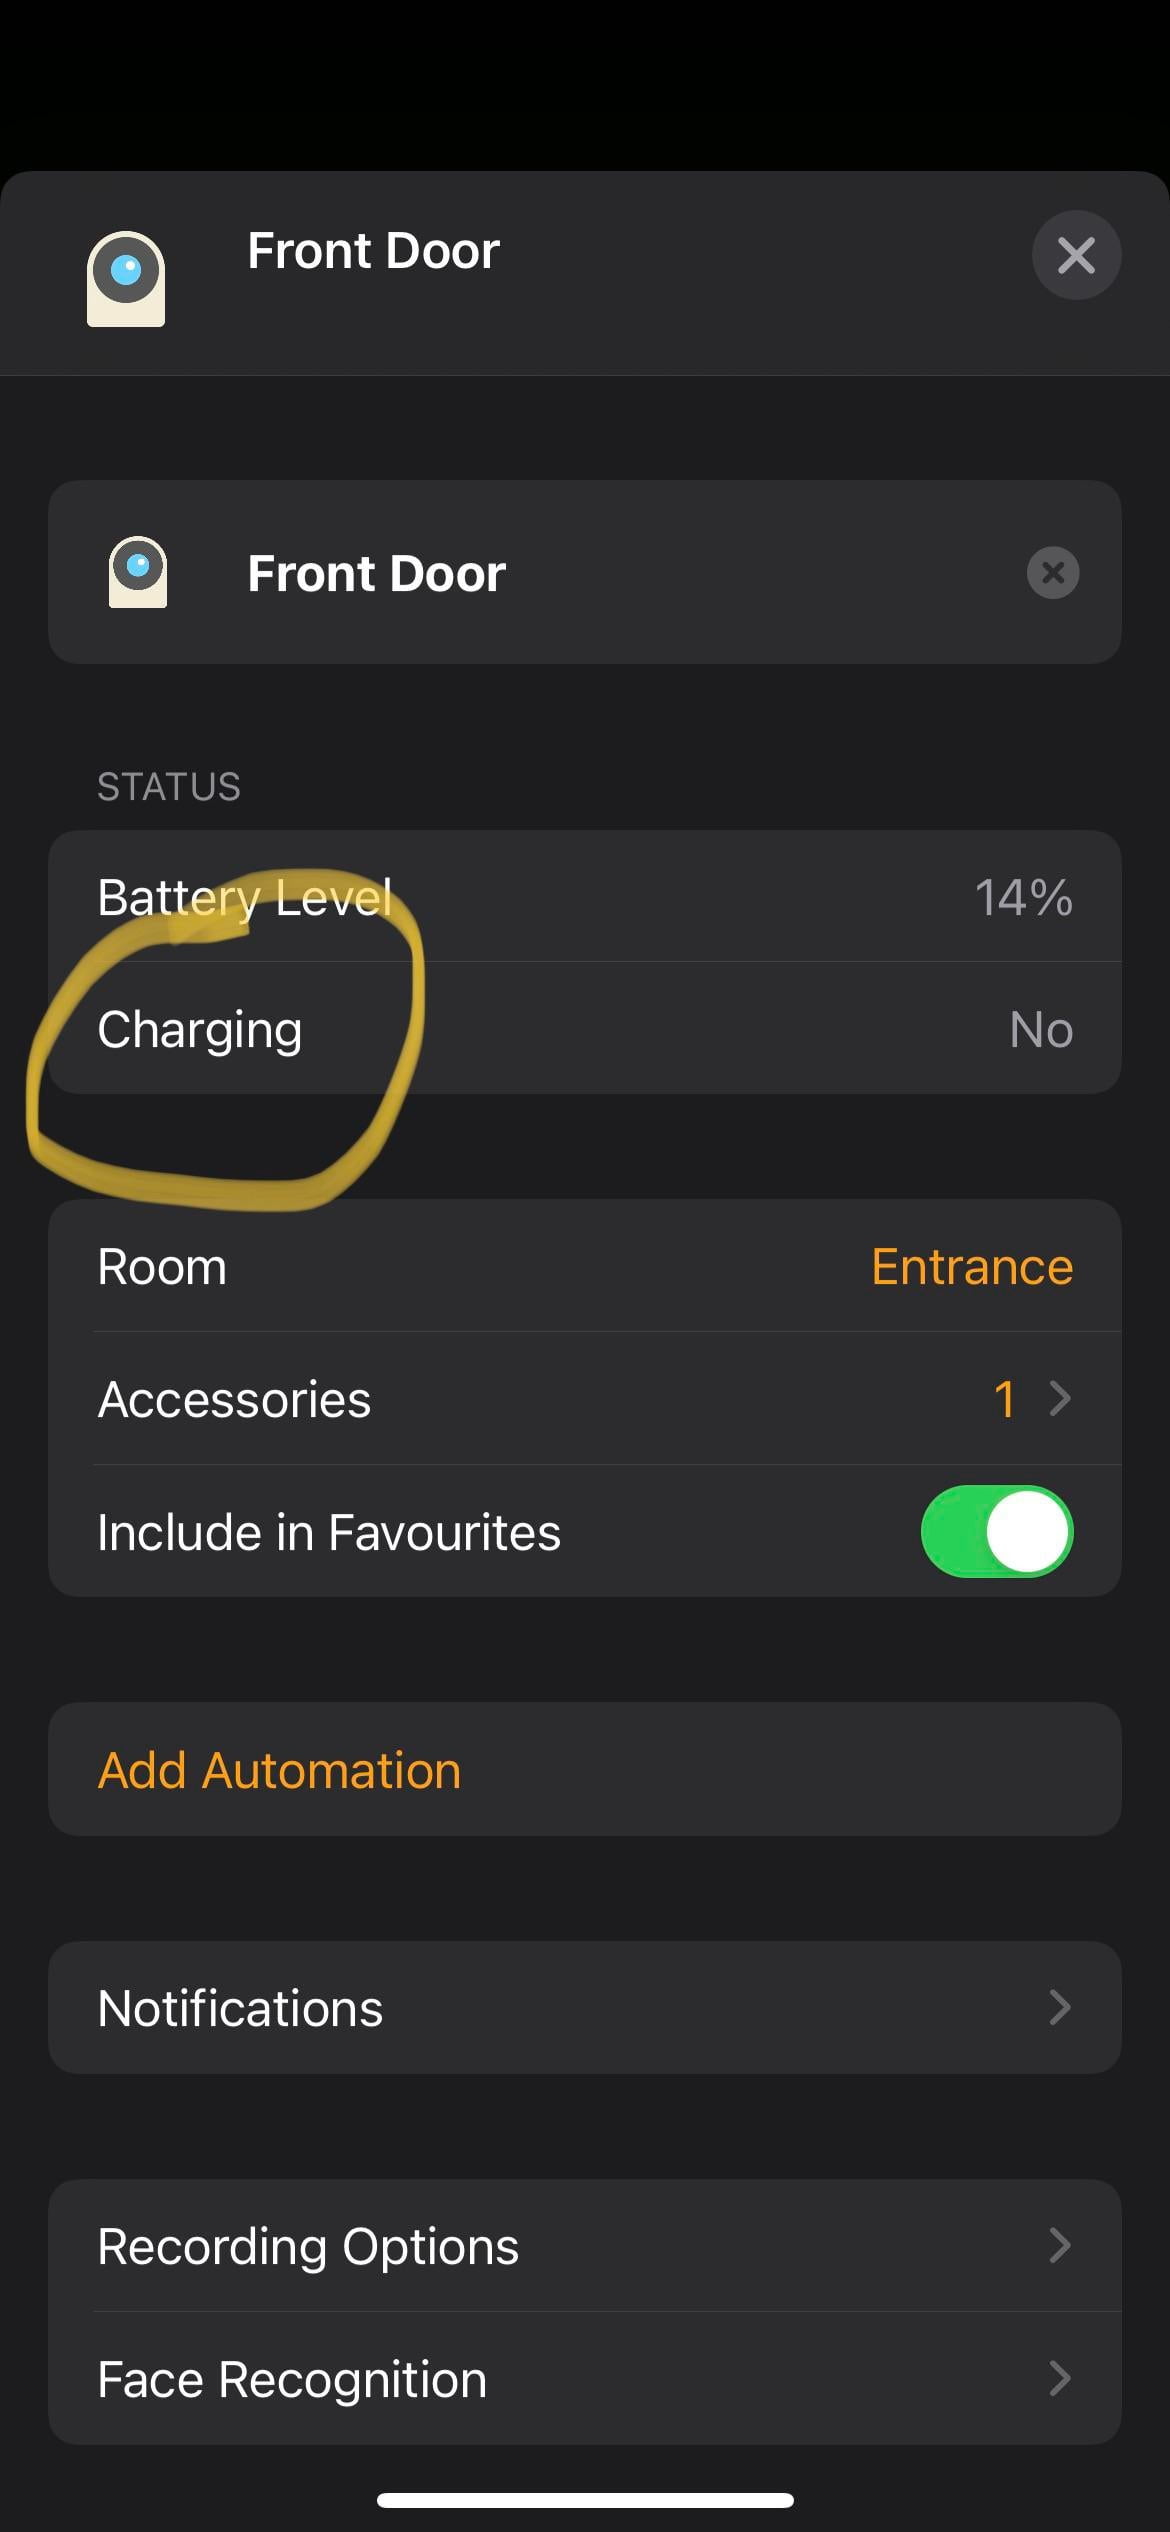 Hello guys Will it appear in the HomeKit settings as